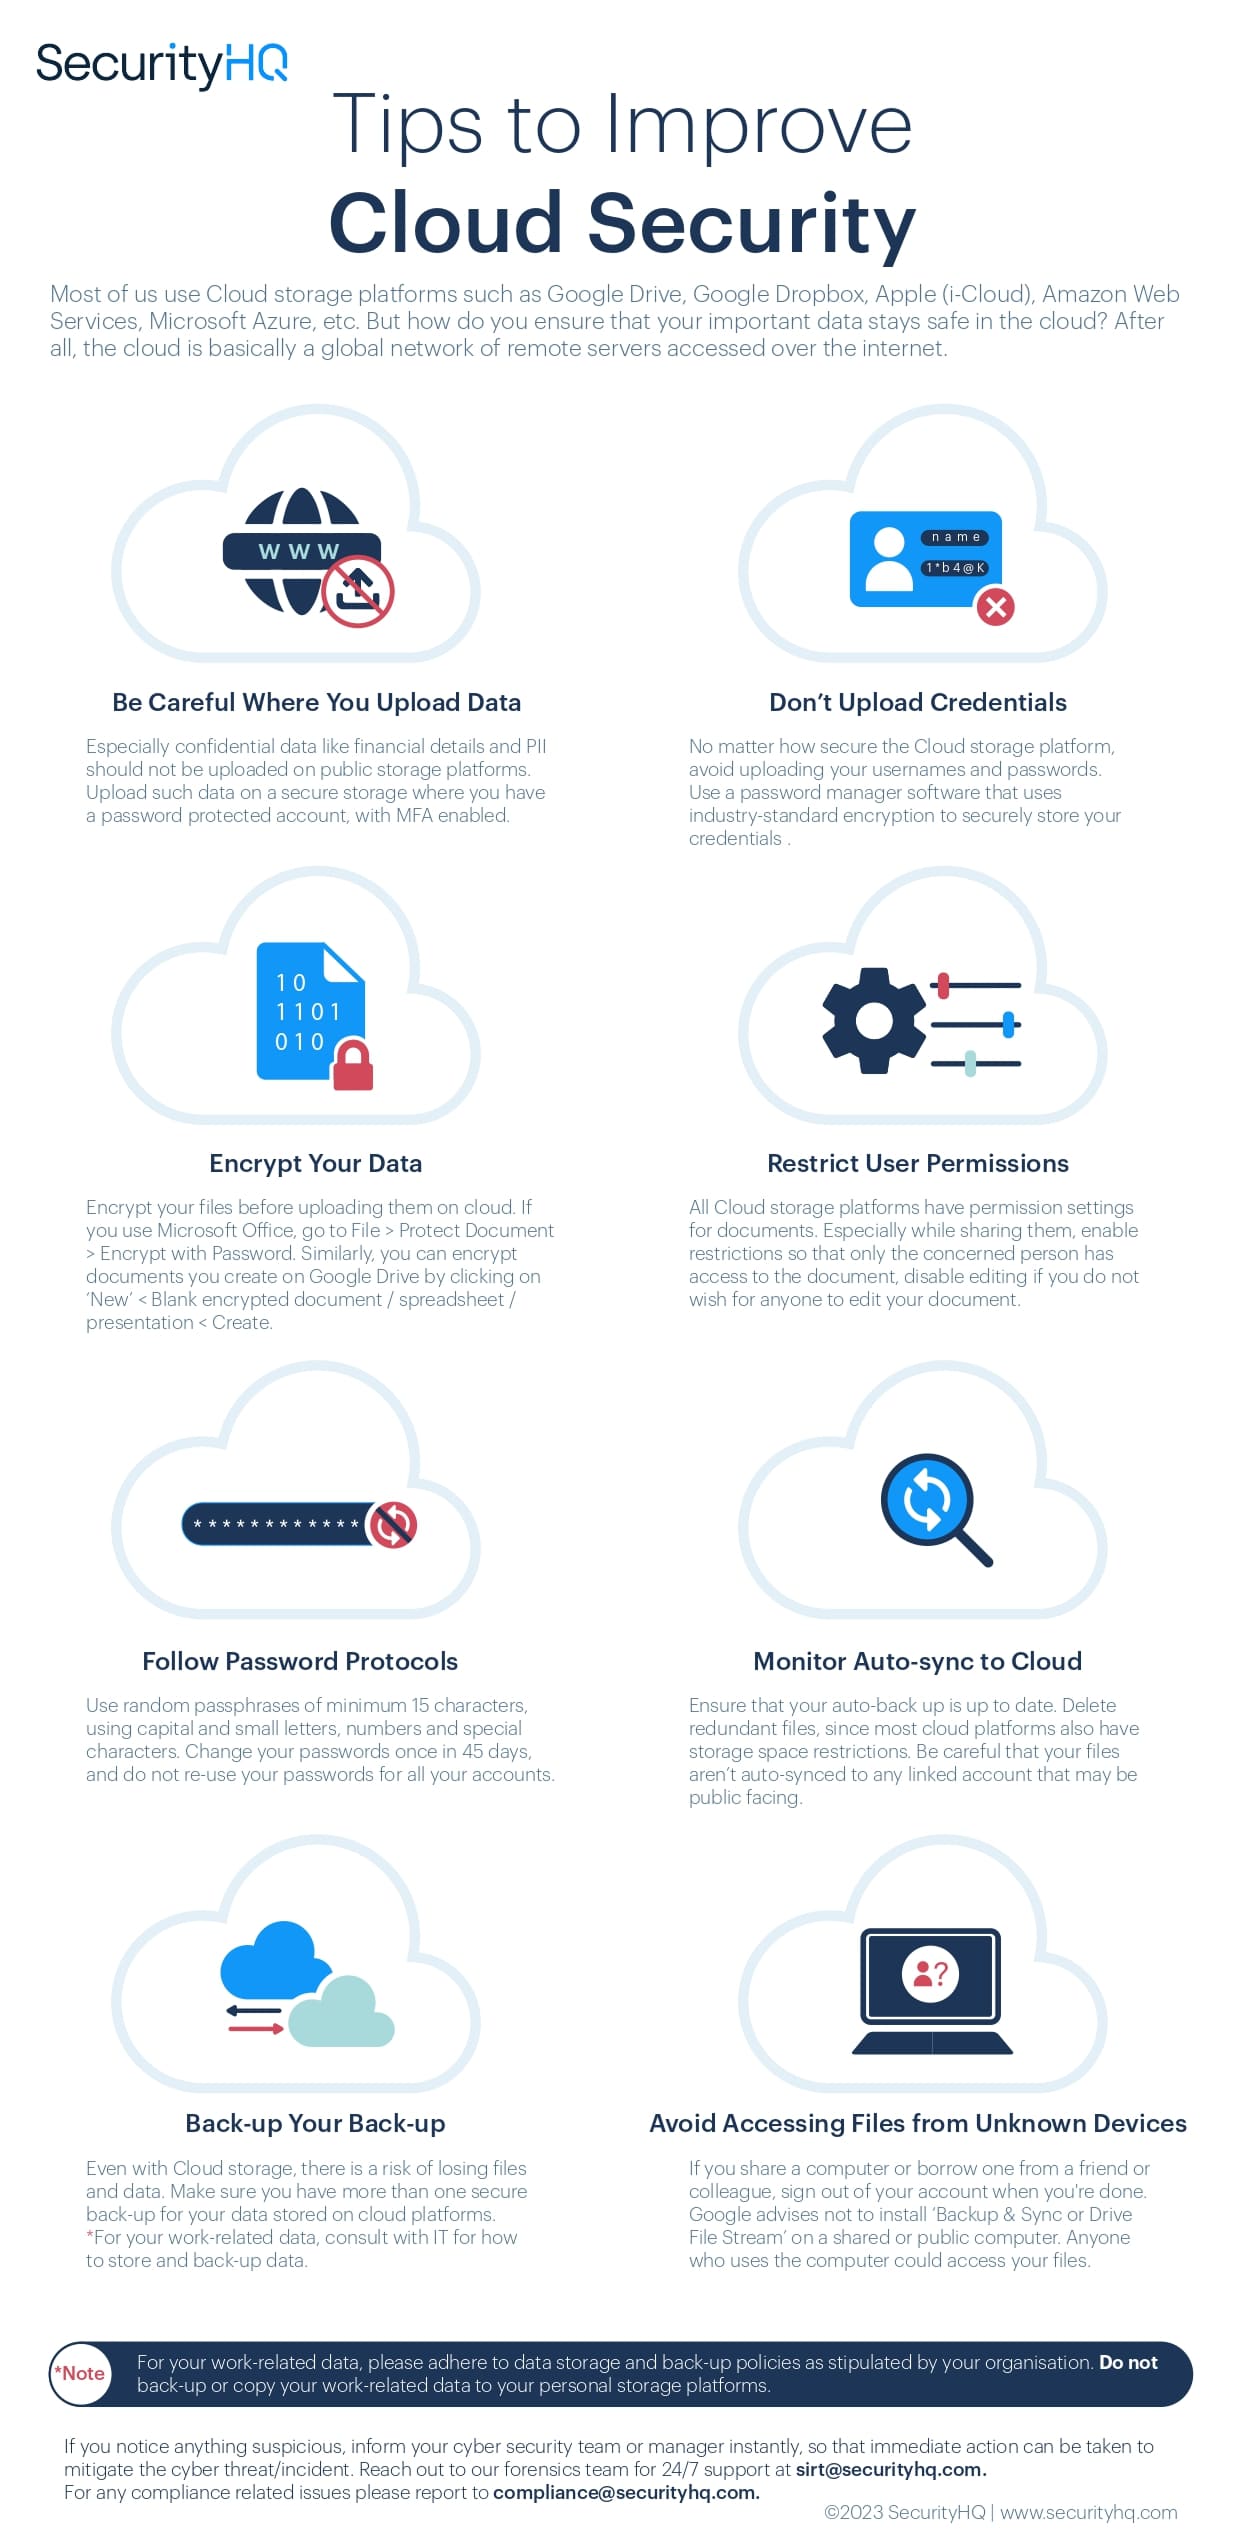 8 Top Tips to Improve Your Cloud Security  [Infographic]